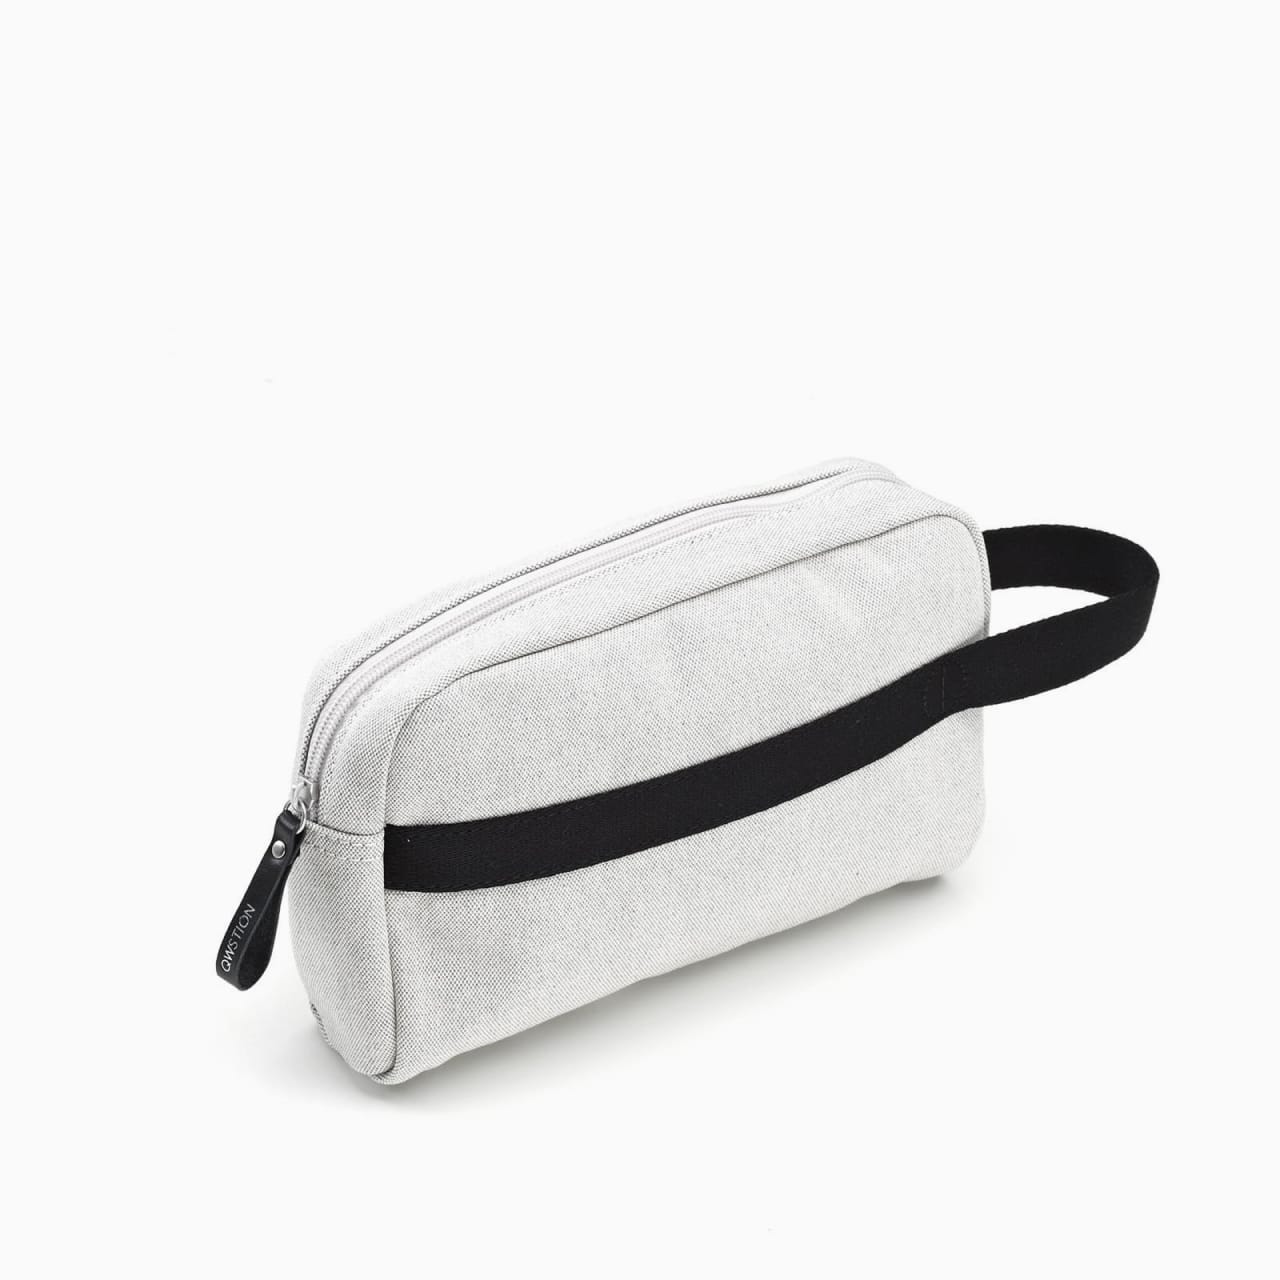 White fabric pouch with white zipper, black zipper pull, and black elastic loop.